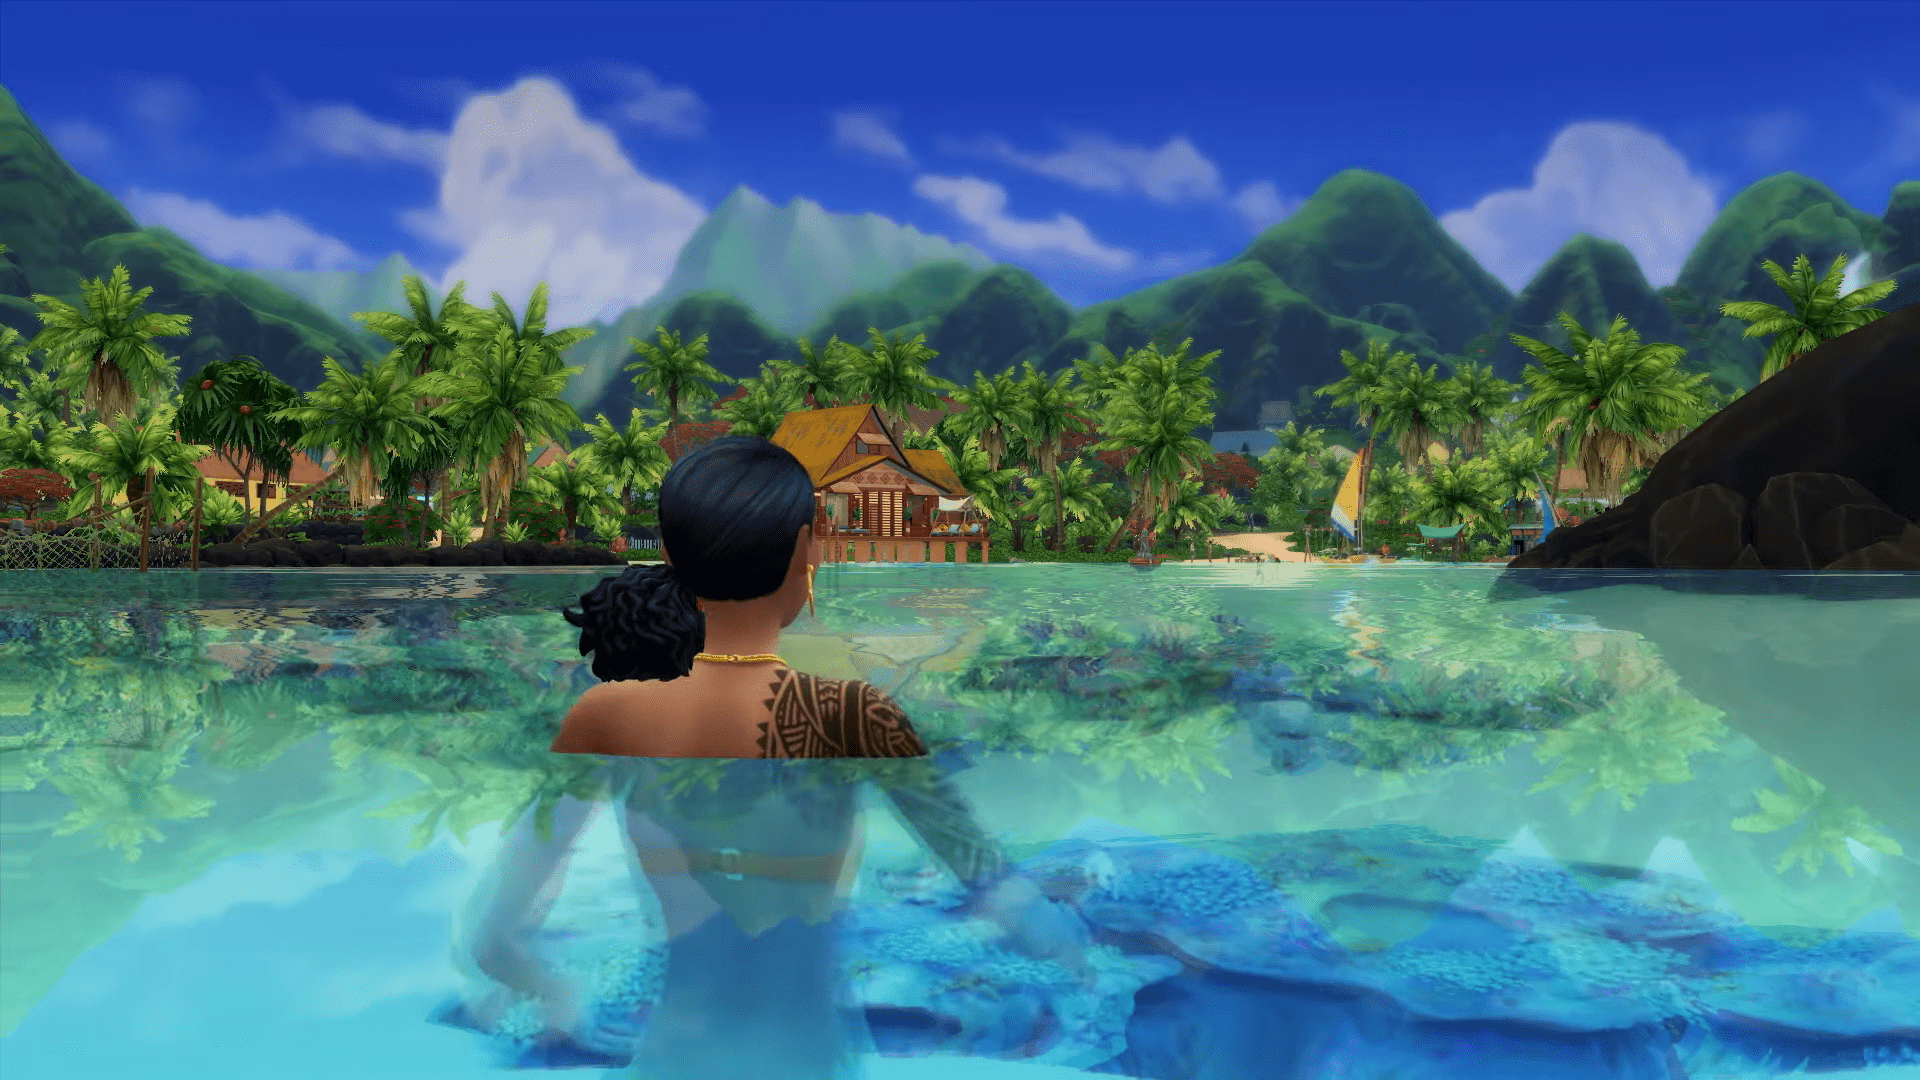 The Sims 4 Island Living Expansion Pack Welcomes Mermaids, Dolphins, And More